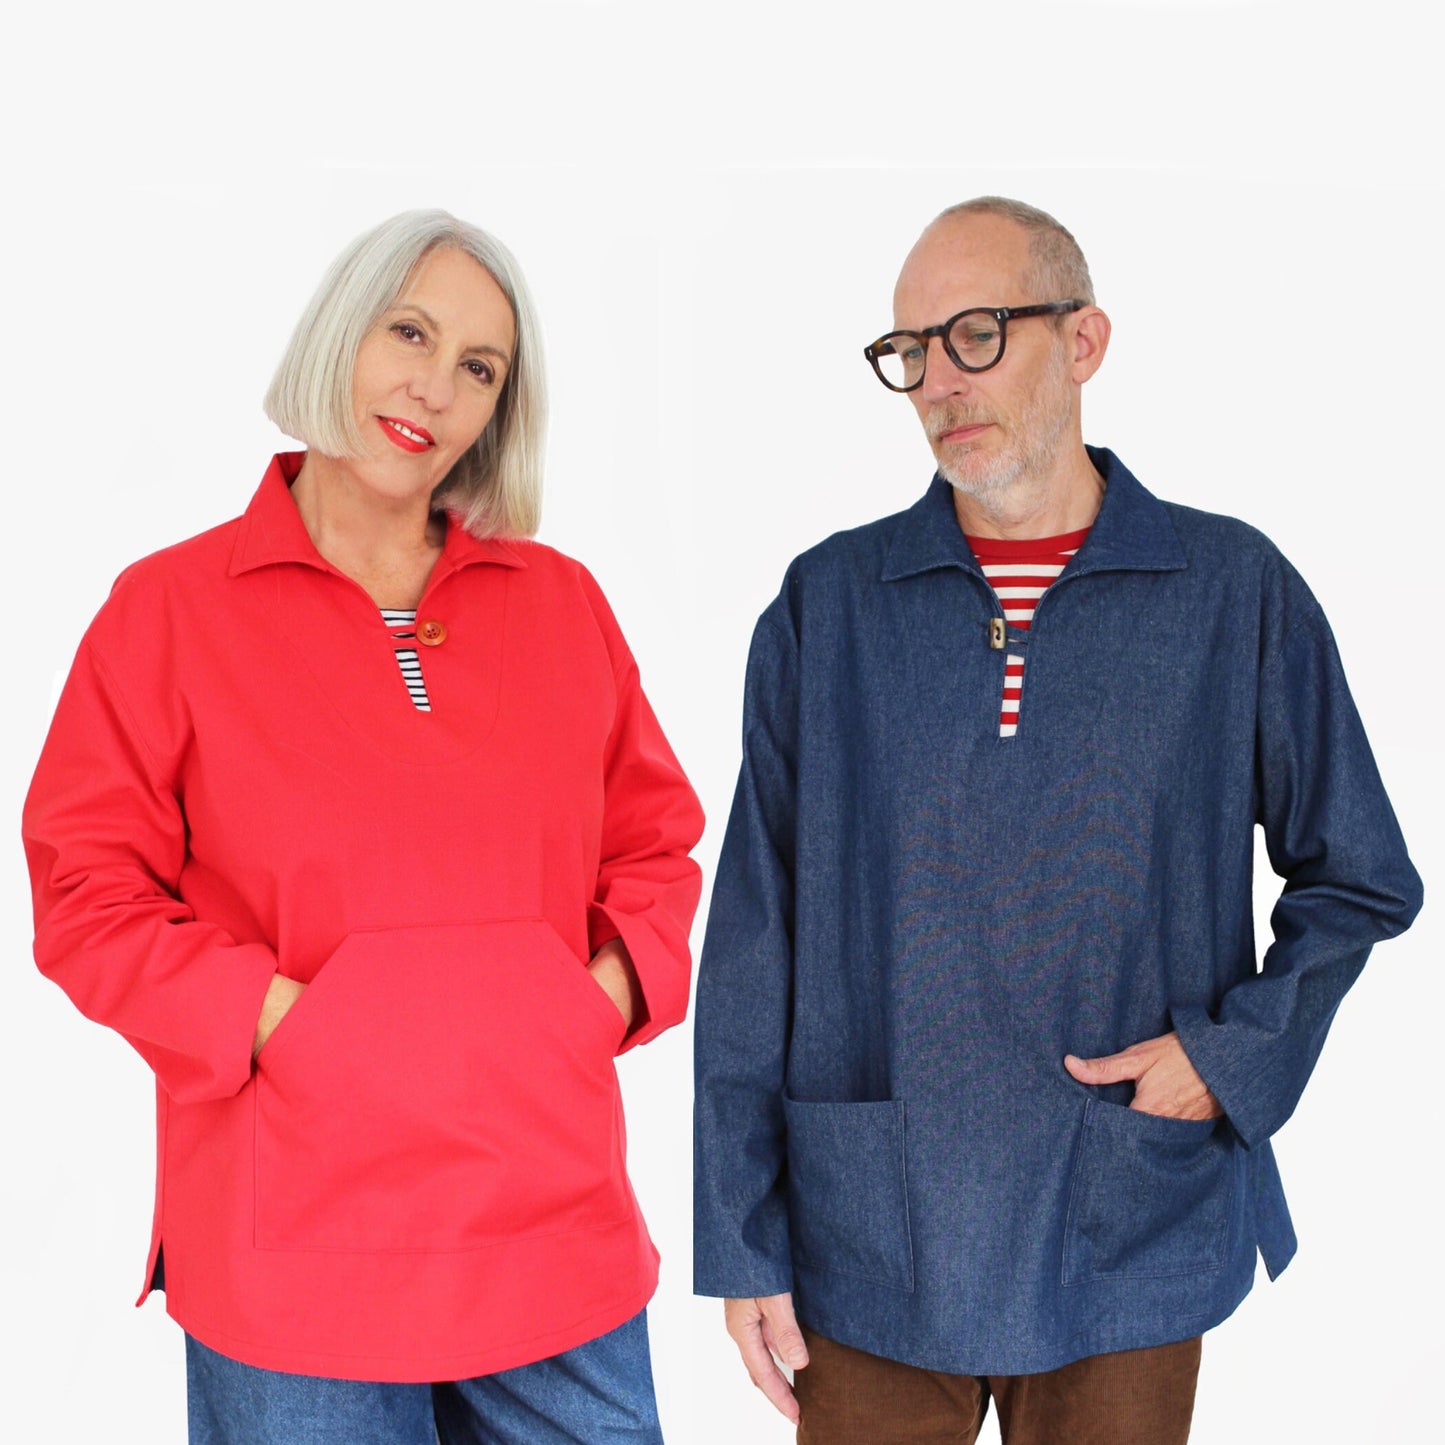 ST IVES TOP unisex sewing pattern